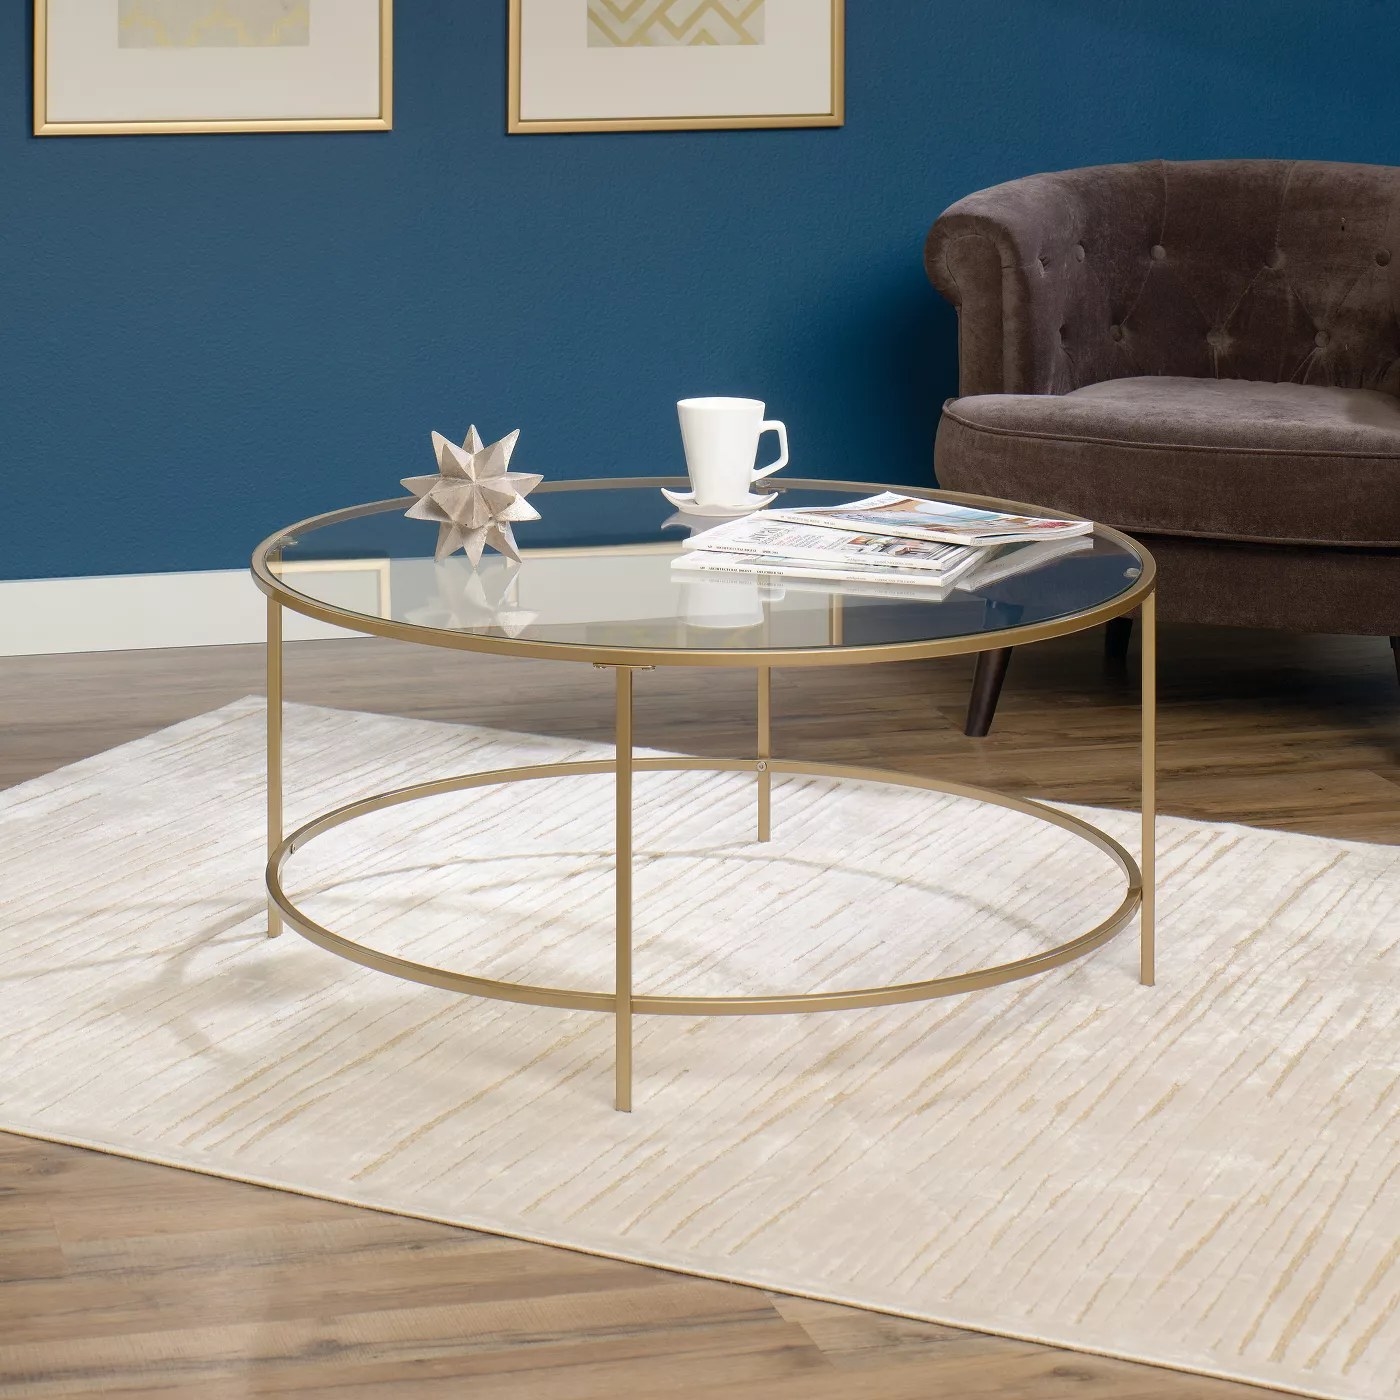 the gold trimmed glass top coffee table 